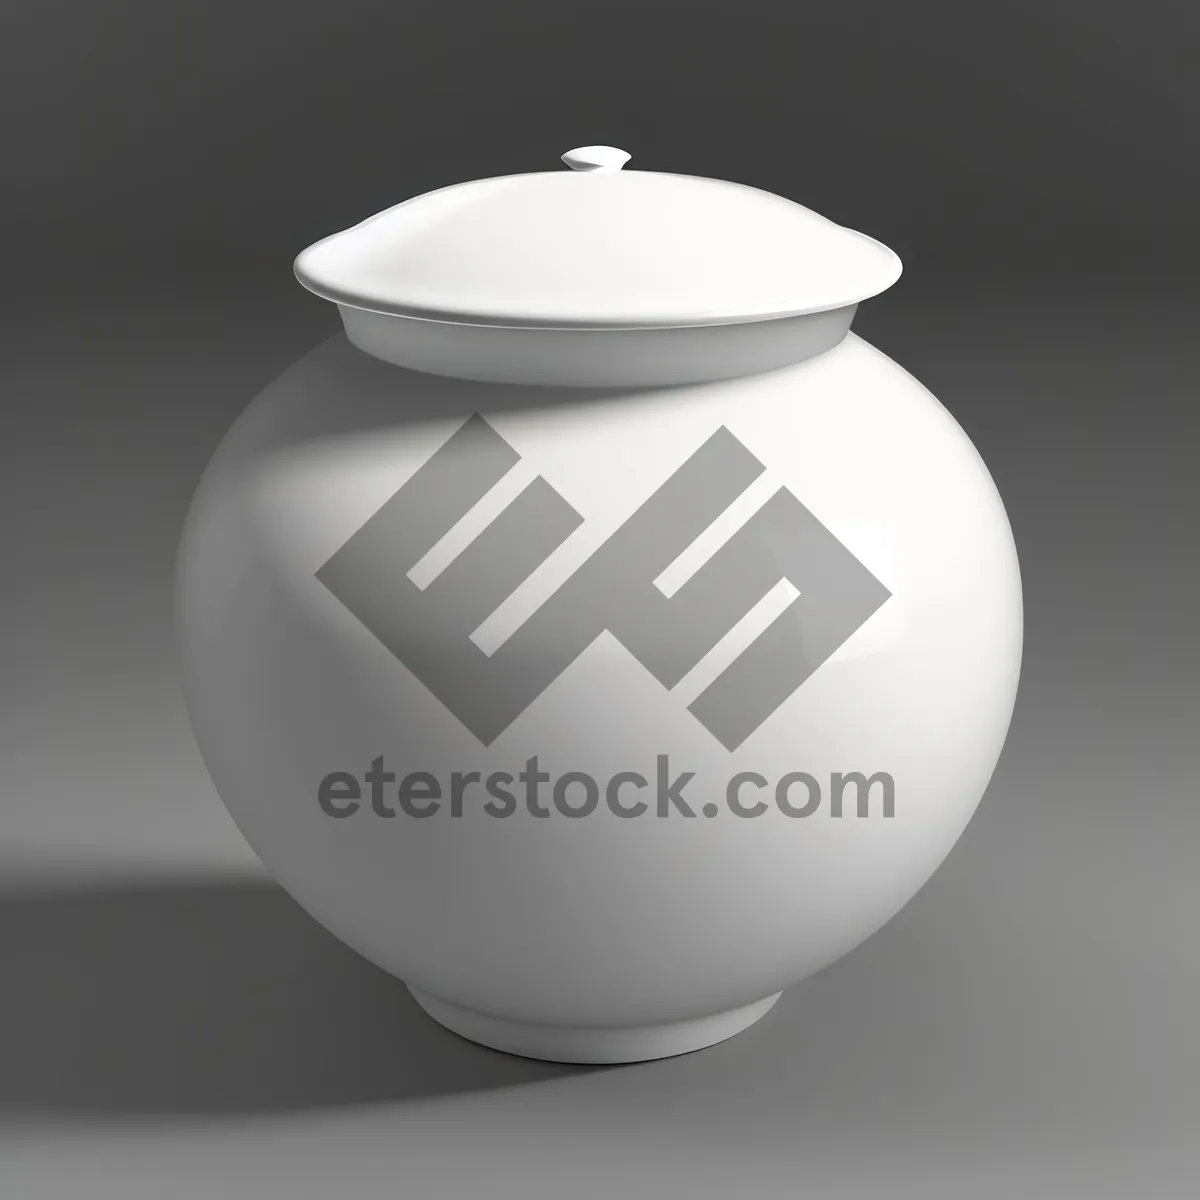 Picture of Cup of Porcelain Tea in China